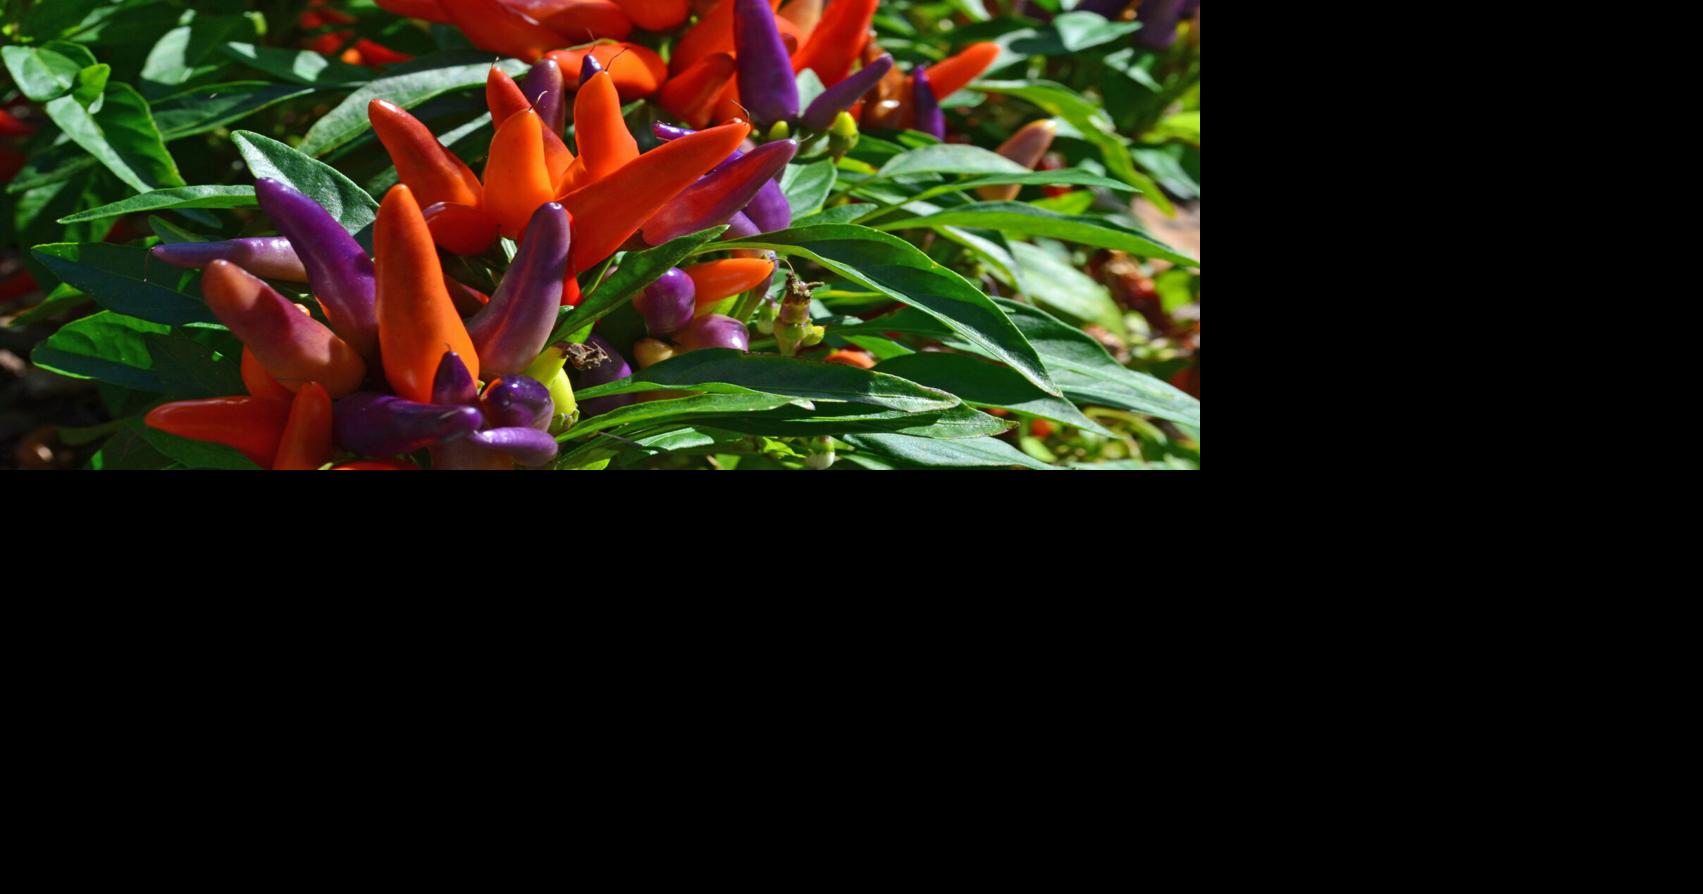 SOUTHERN GARDENING: Ornamental peppers can add winter spice | Living